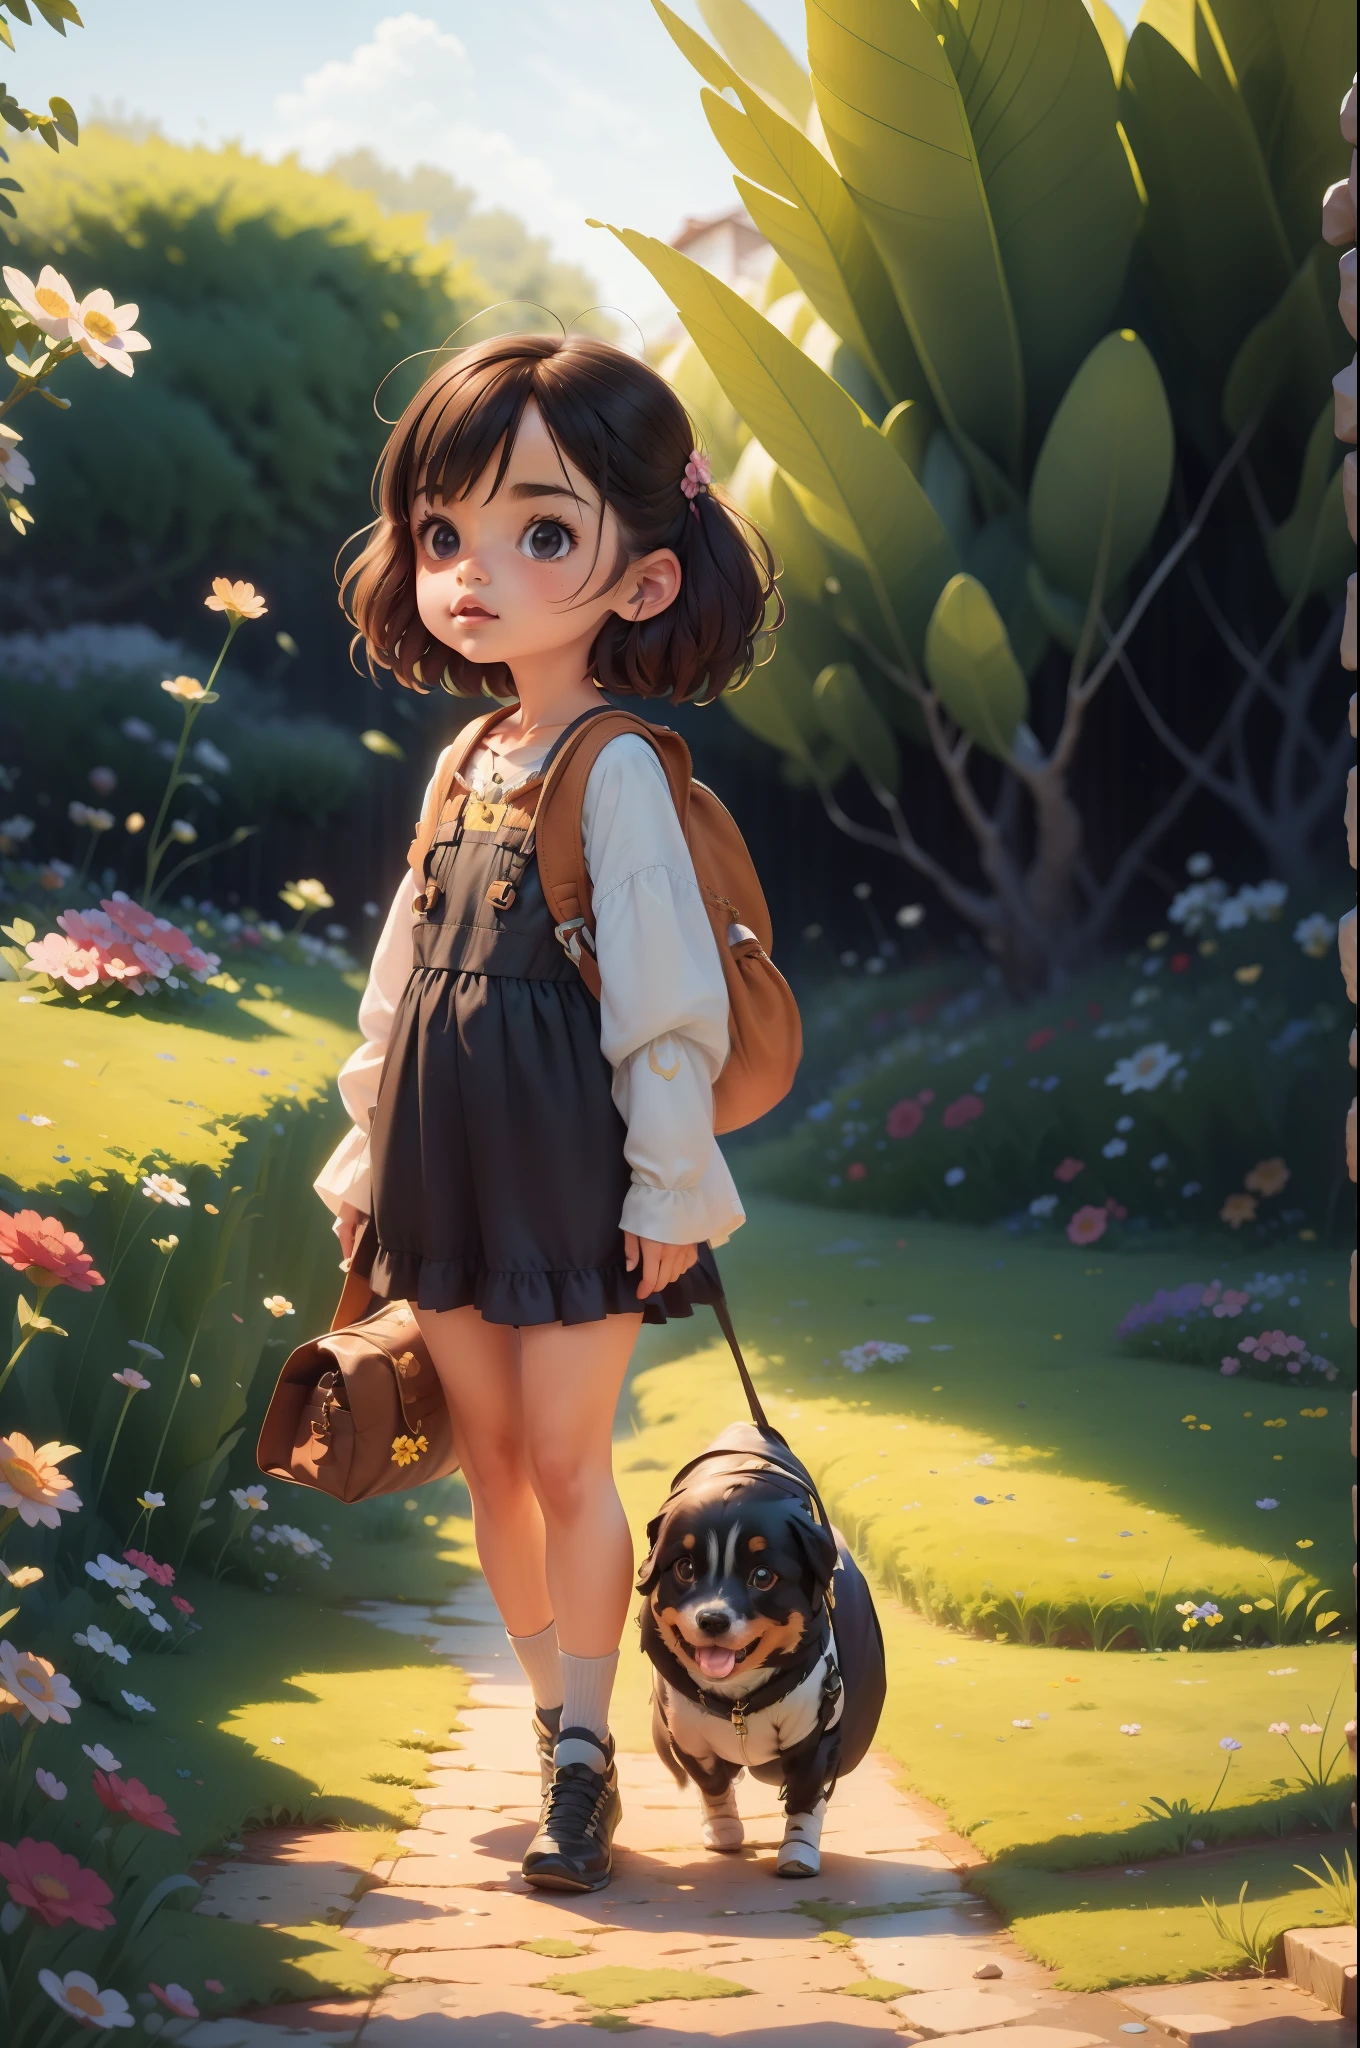 A very attractive girl with a backpack and a cute dog、Enjoying a cute spring excursion surrounded by beautiful yellow flowers and nature. Illustrations are high-definition illustrations in 4K resolution、Features highly detailed facial features and cartoon-style visuals